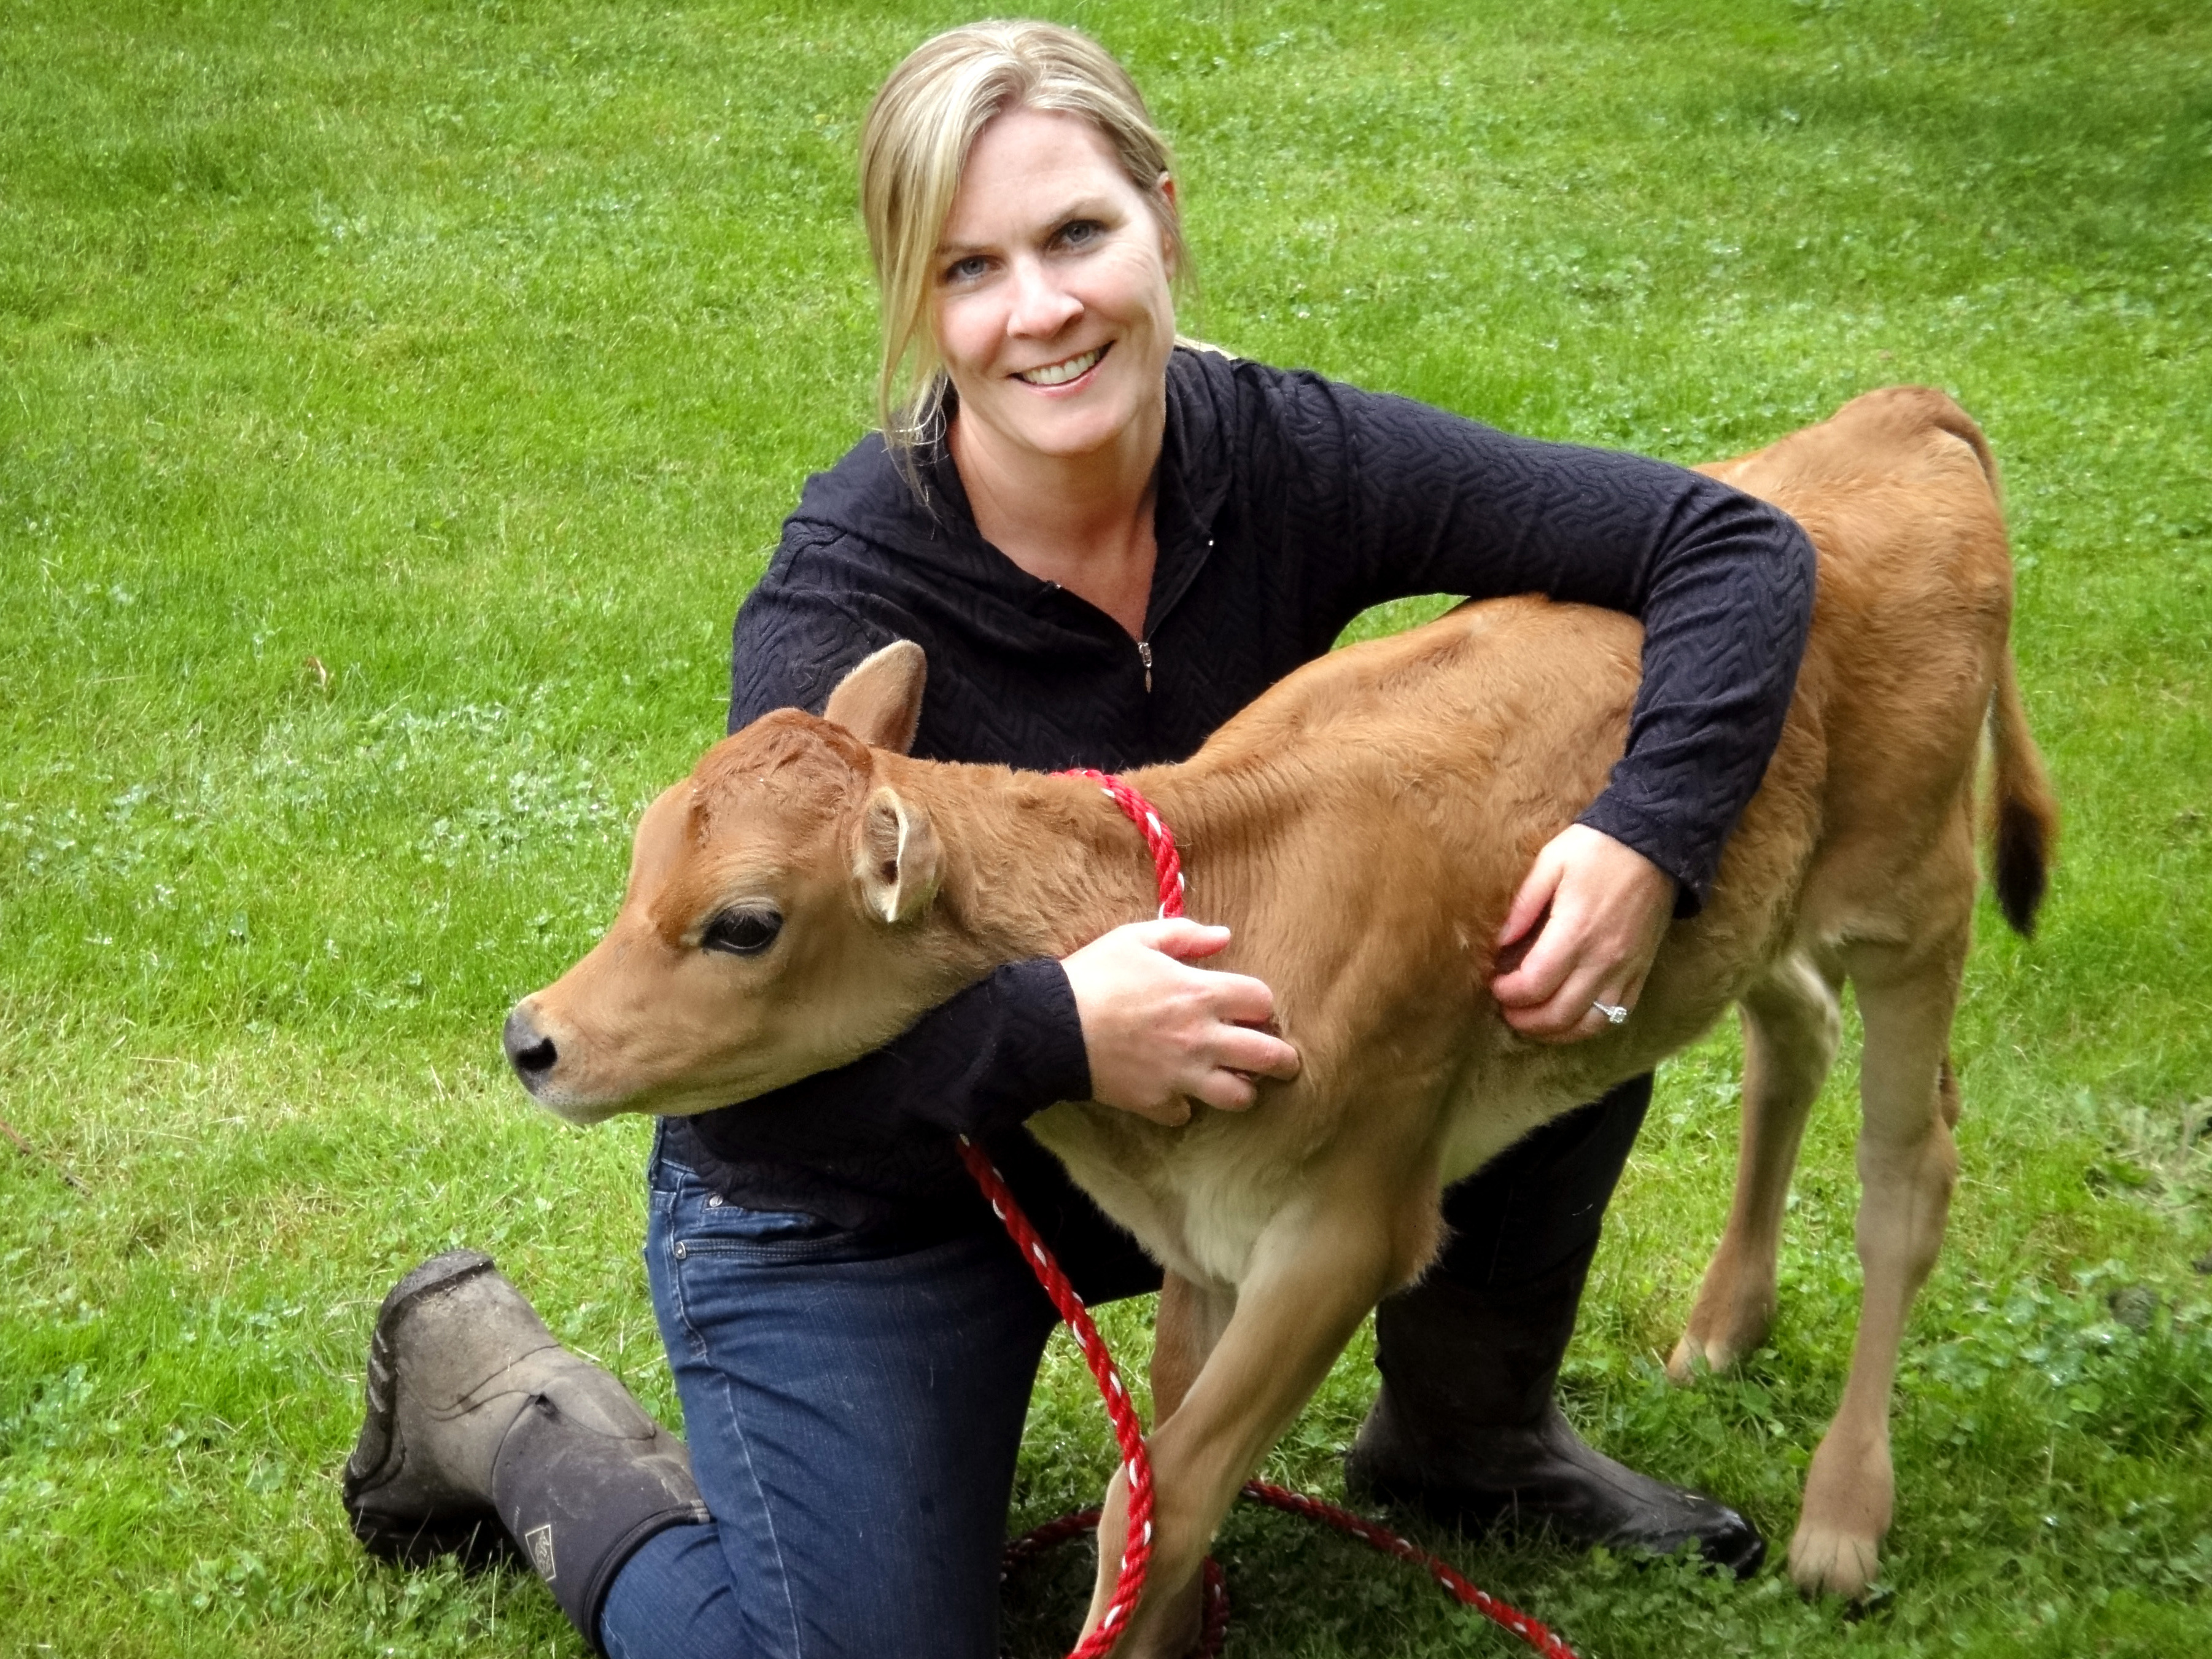 Charlotte Smith, of Champoeg Creamery in St. Paul, Ore., says raw milk may offer health benefits. But she also acknowledges its very real dangers. Photo: Courtesy of Champoeg Creamery